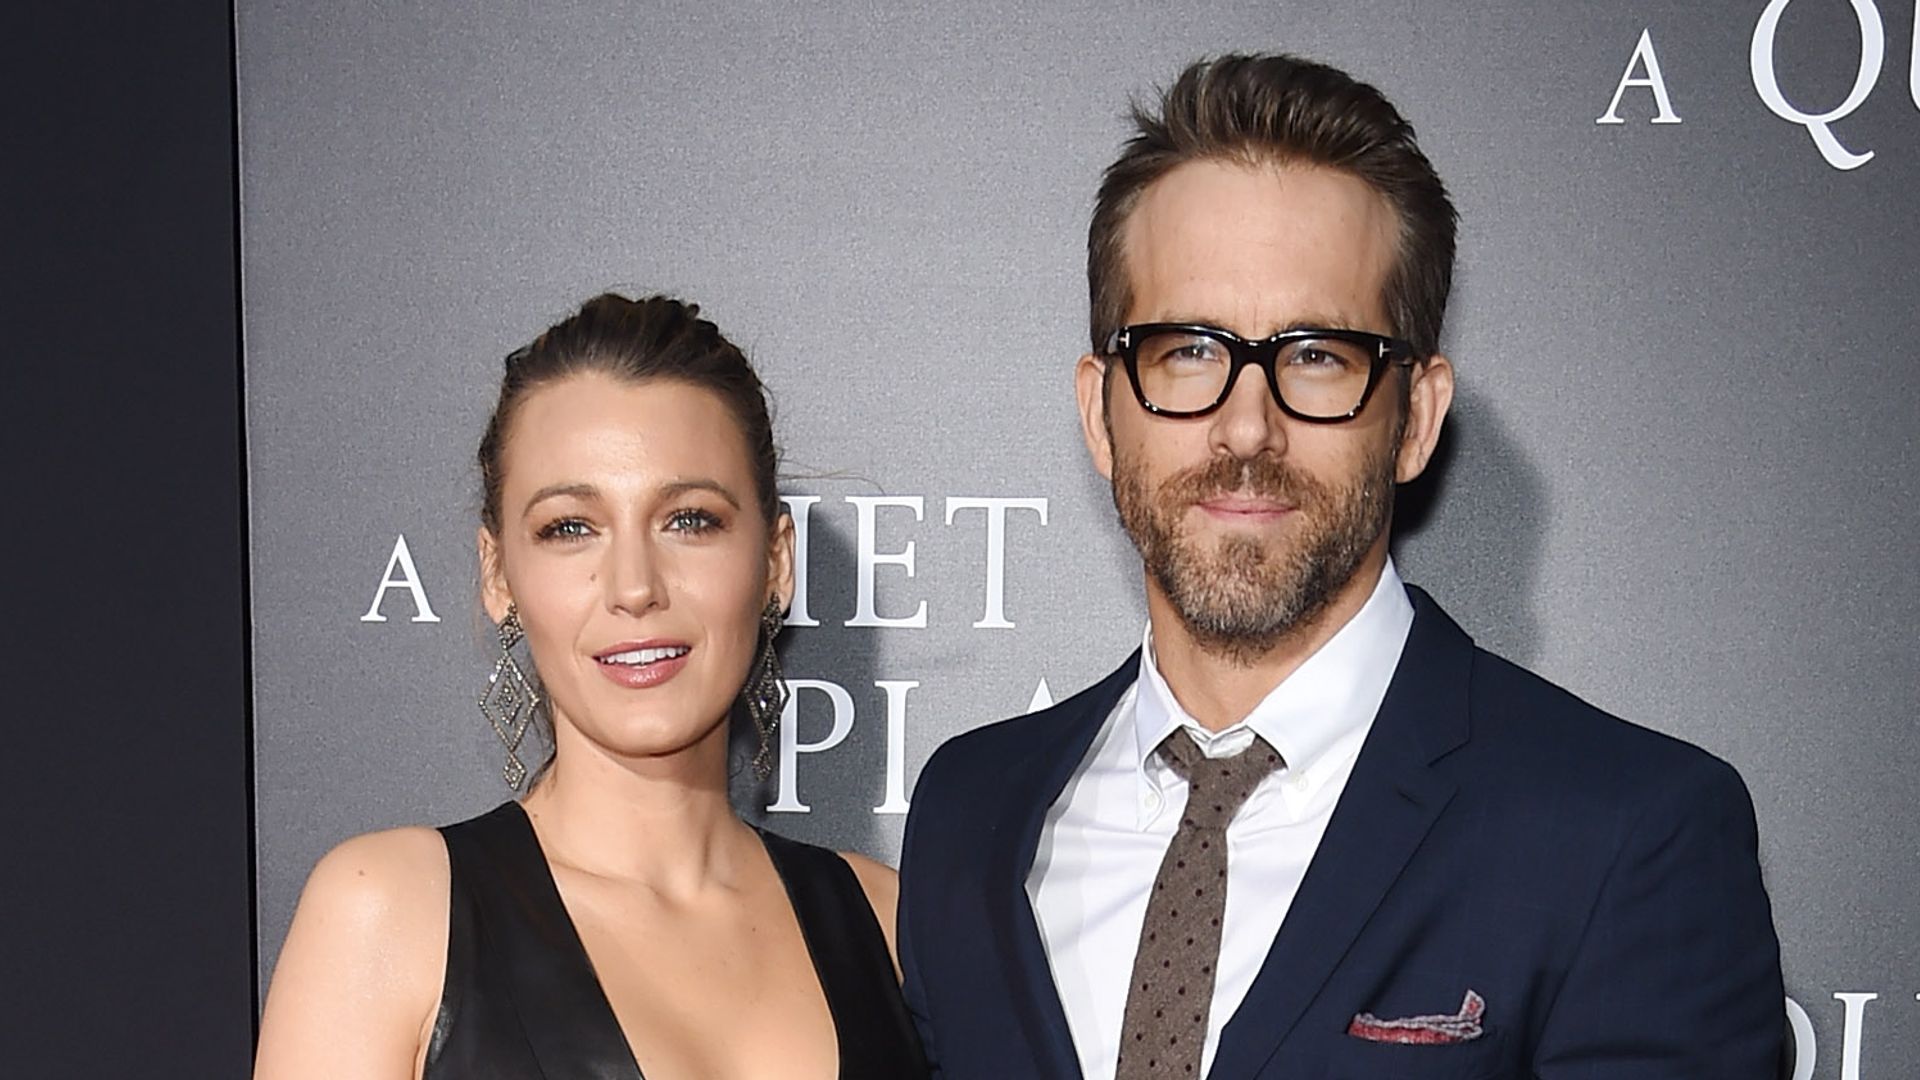 Blake Lively and Ryan Reynolds attend the premiere for "A Quiet Place" at AMC Lincoln Square Theater on April 2, 2018 in New York City